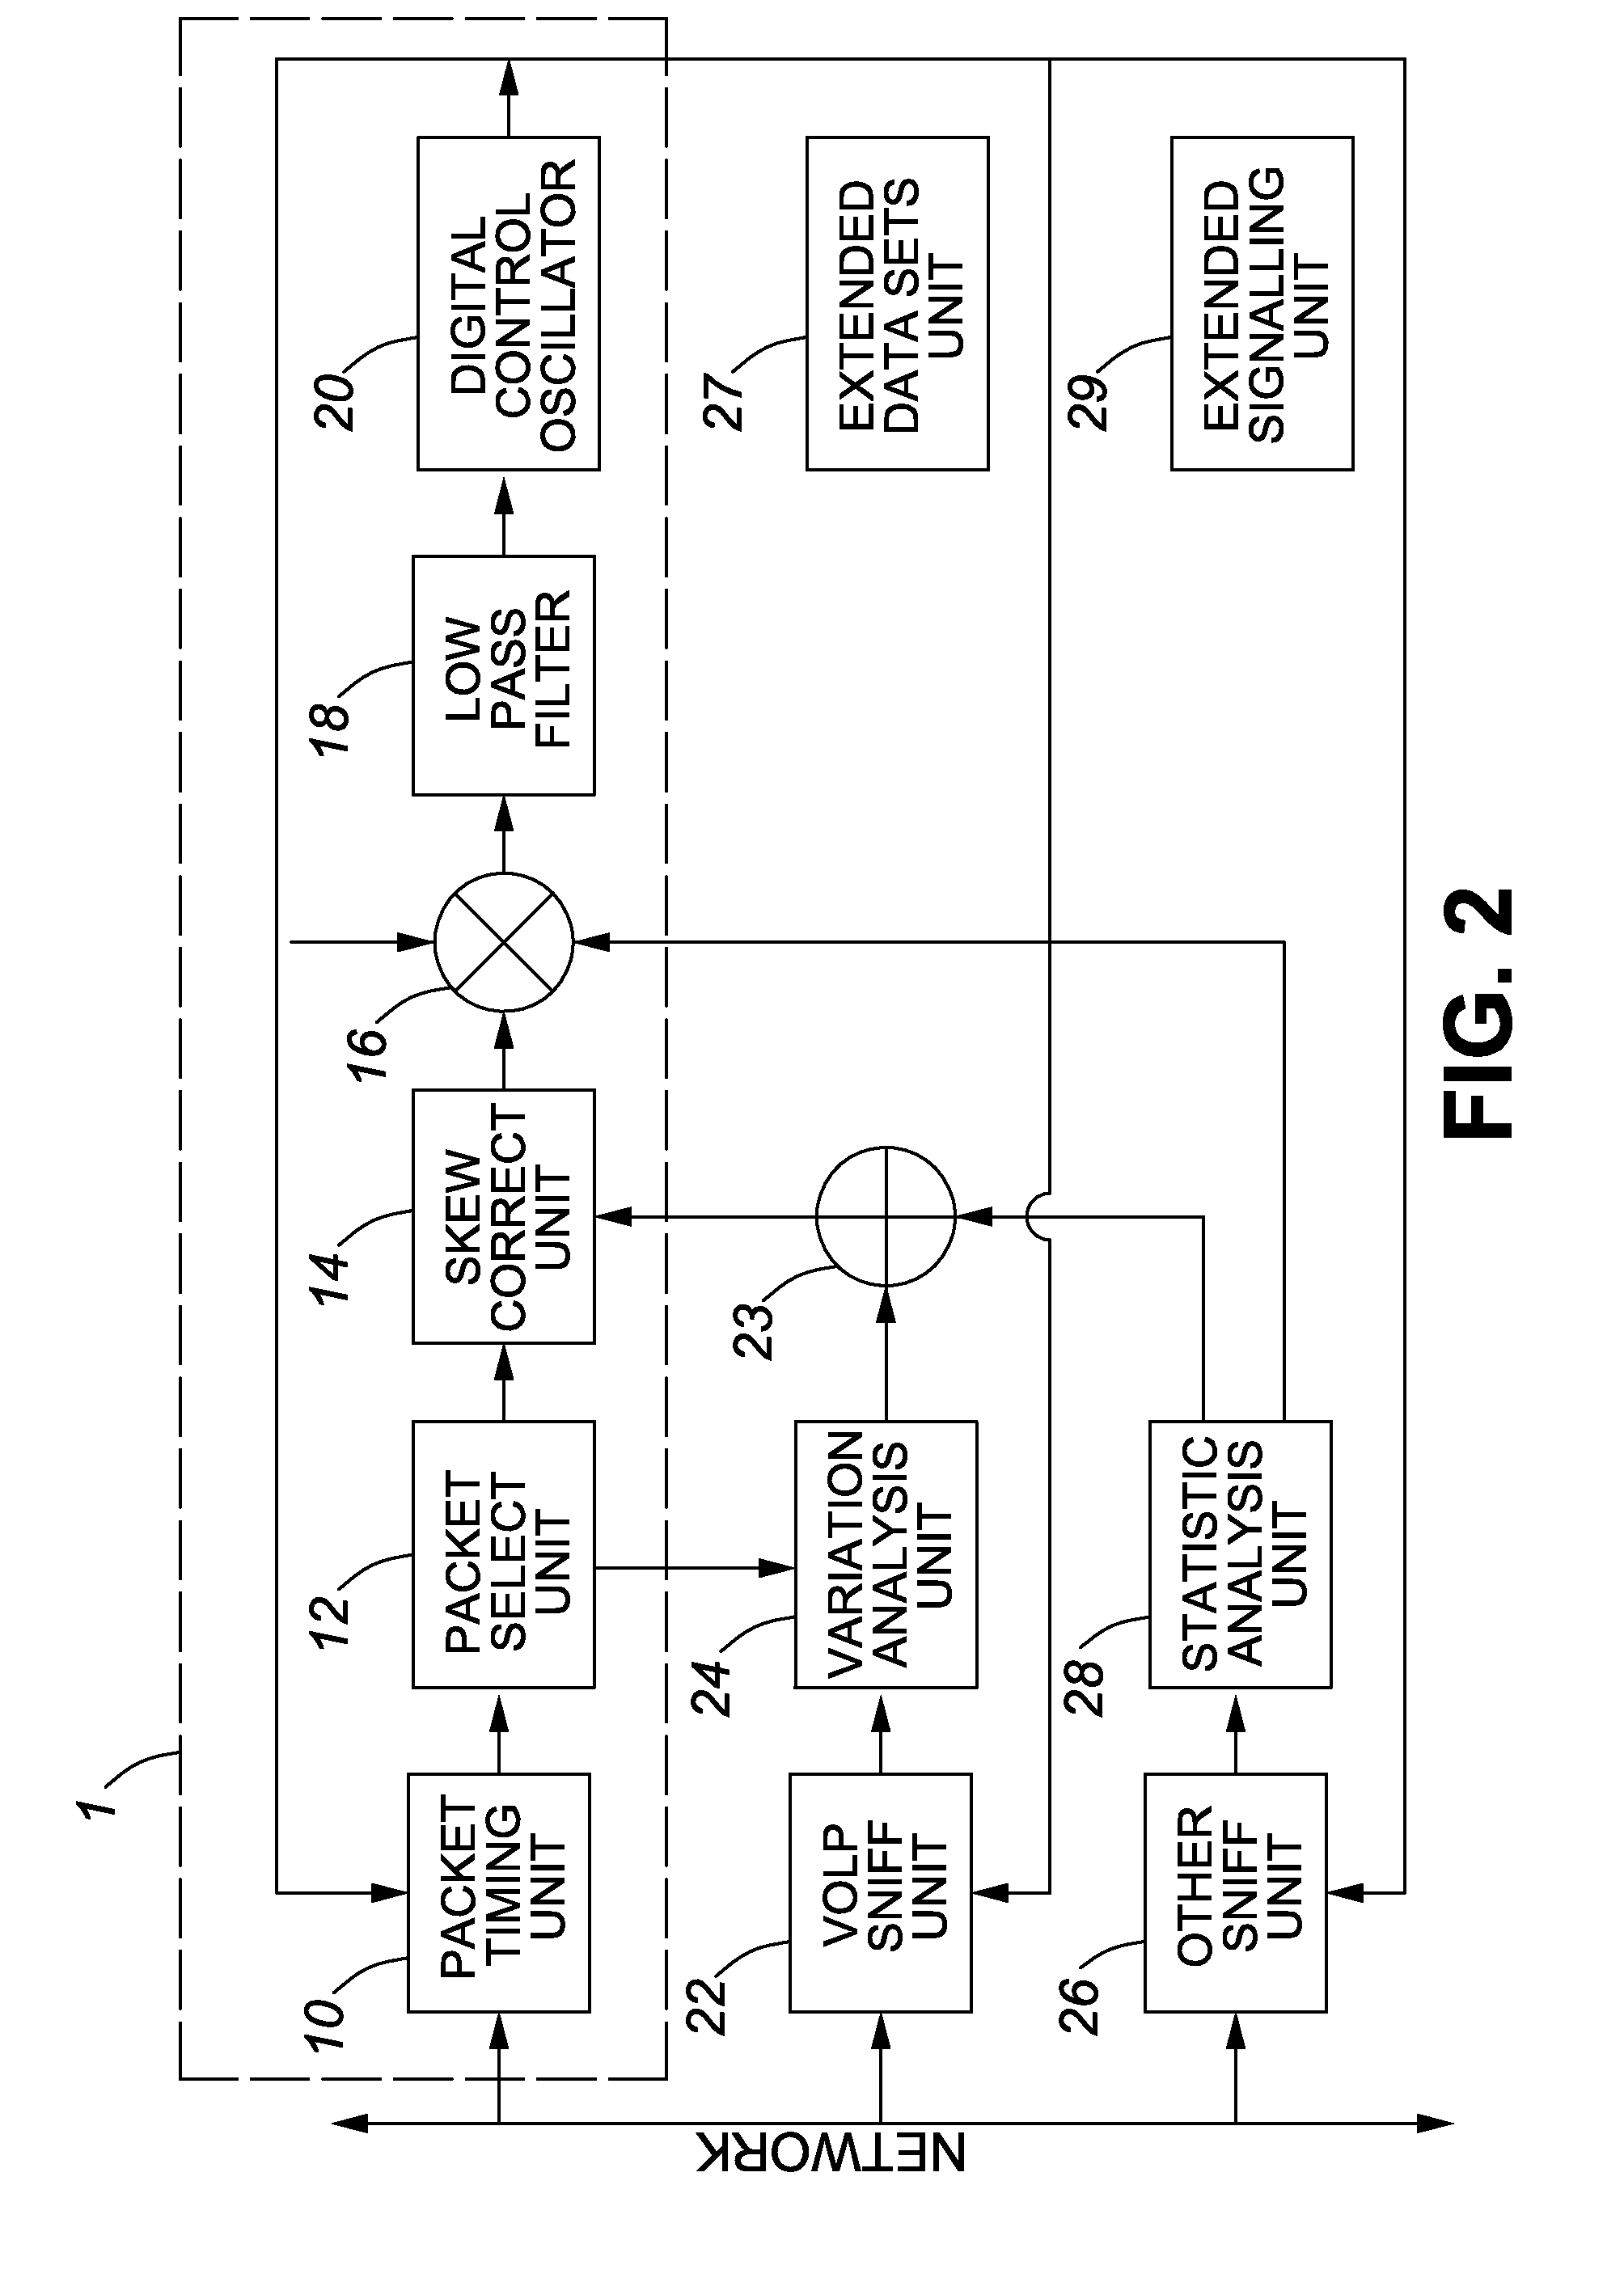 Method of adjusting a local clock in asynchronous packet networks